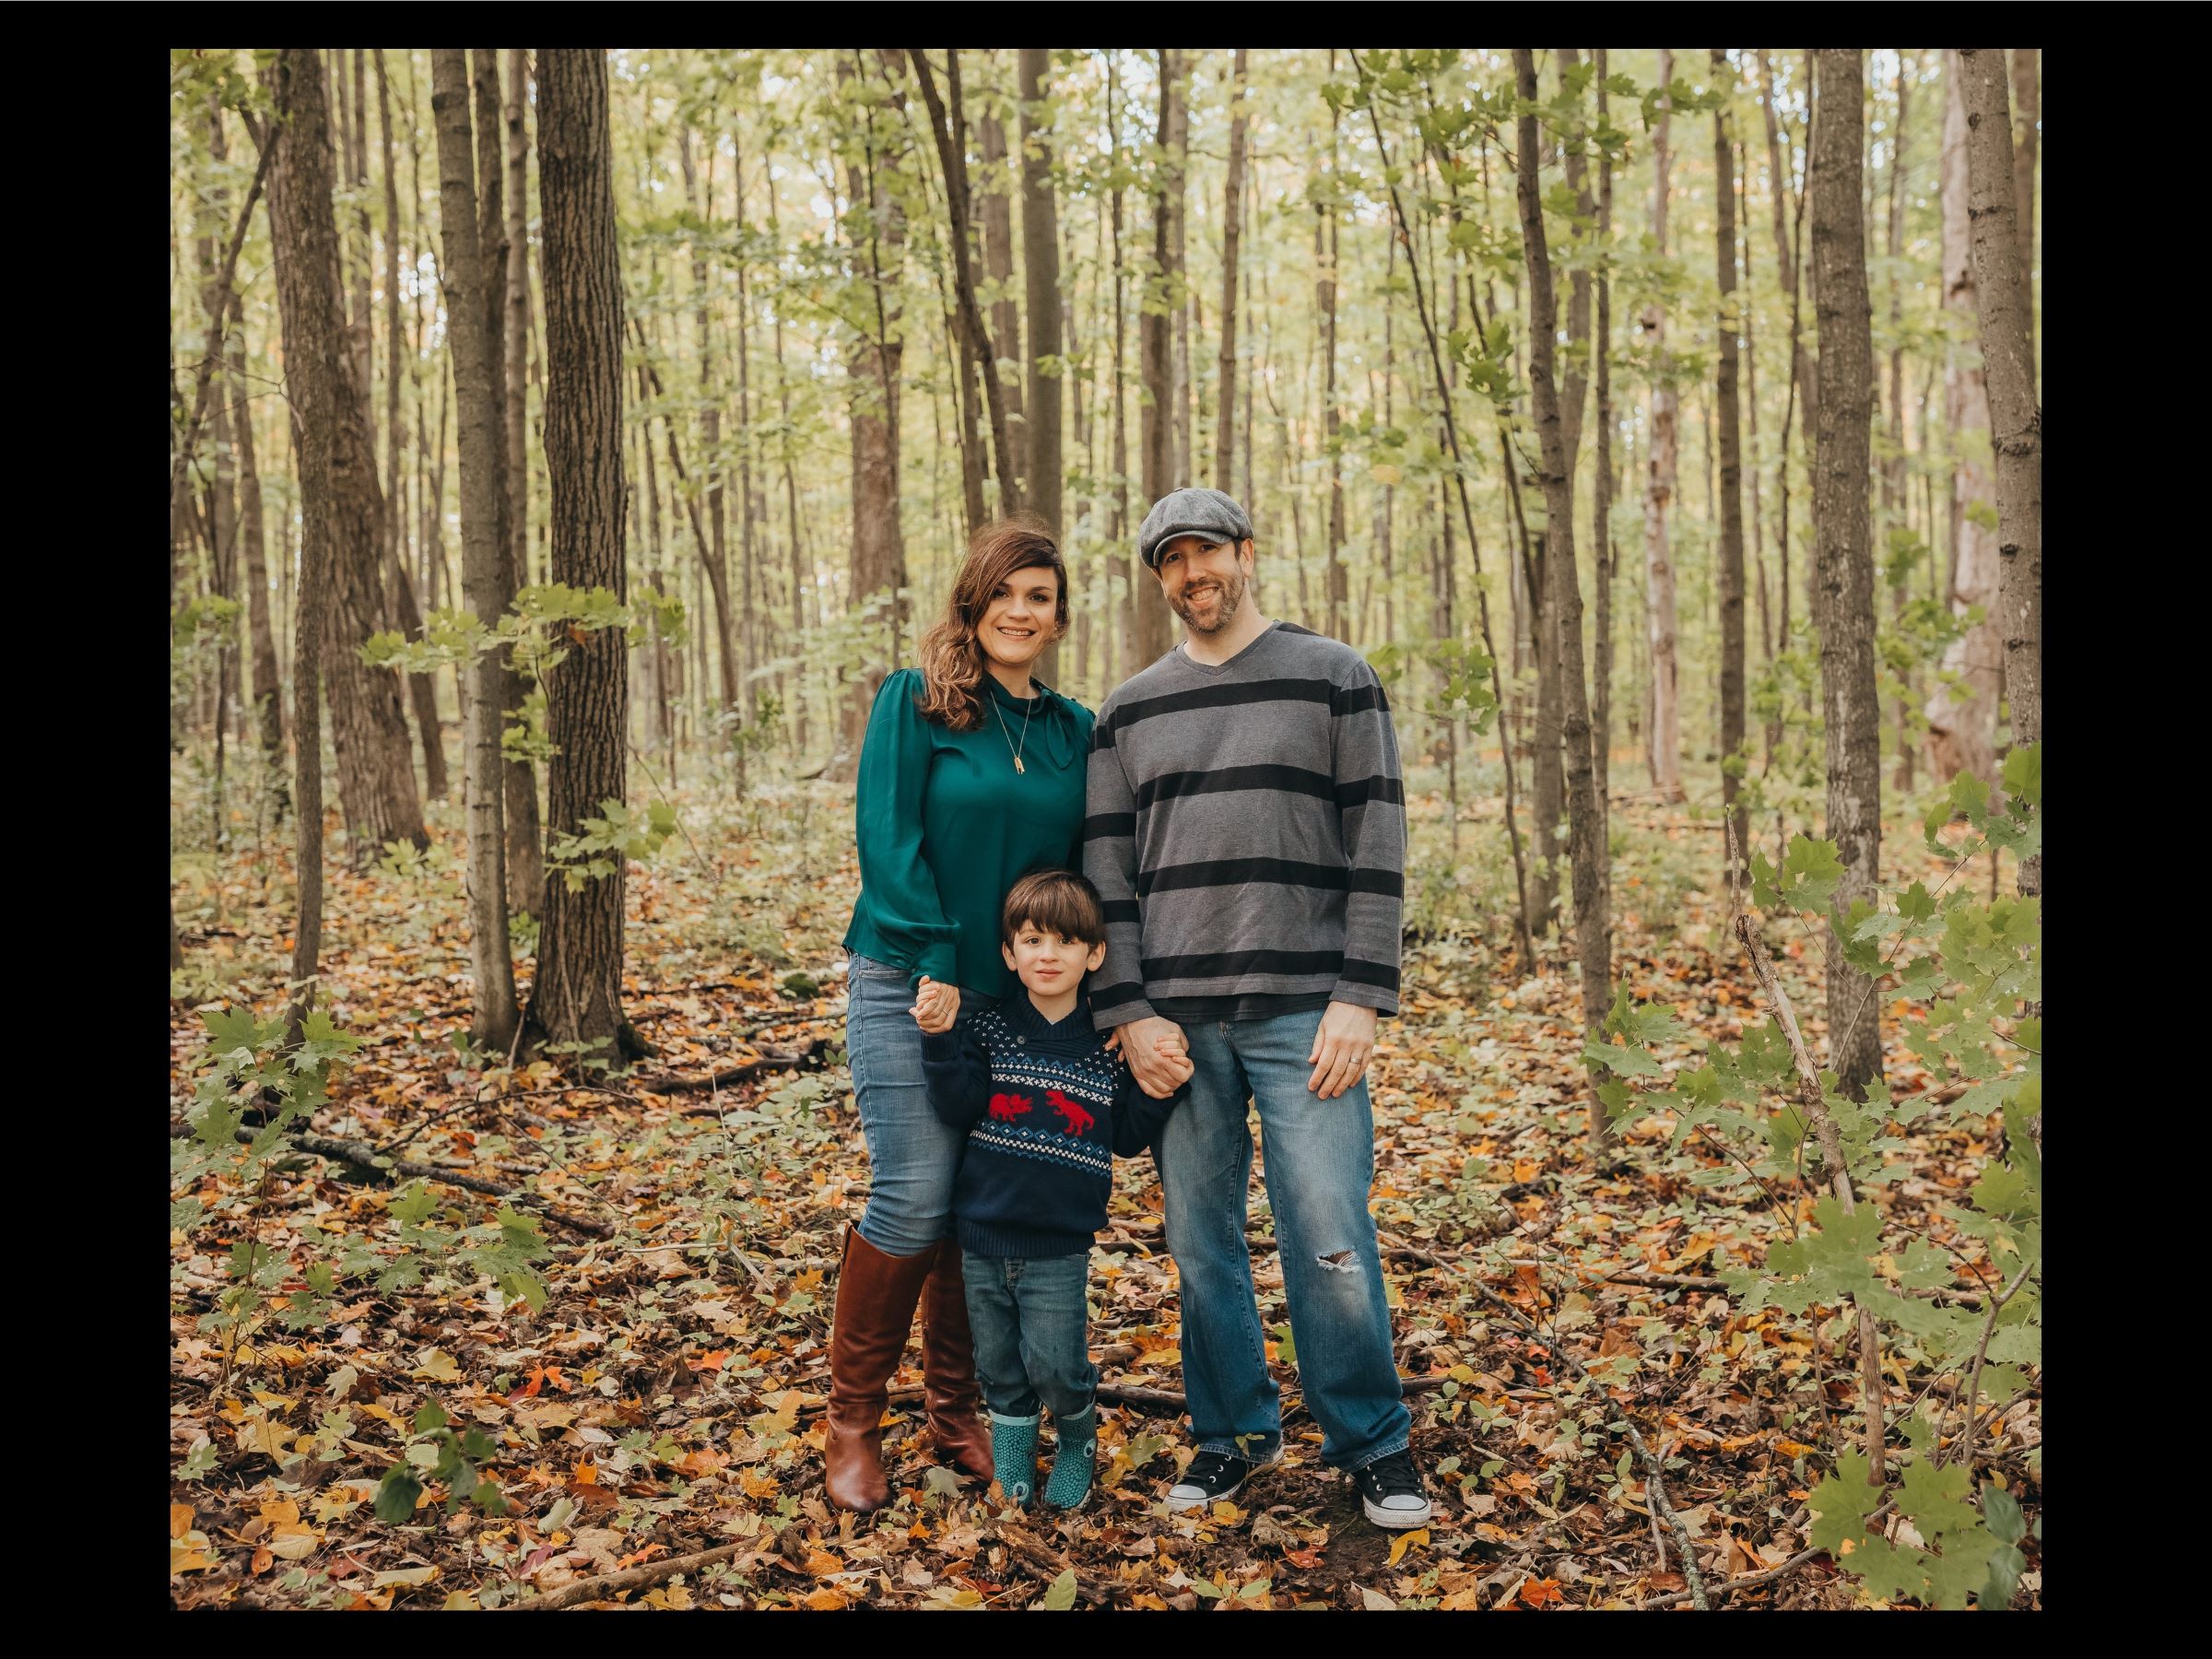 Homeowners Kelli & Scott and their child in the woods.